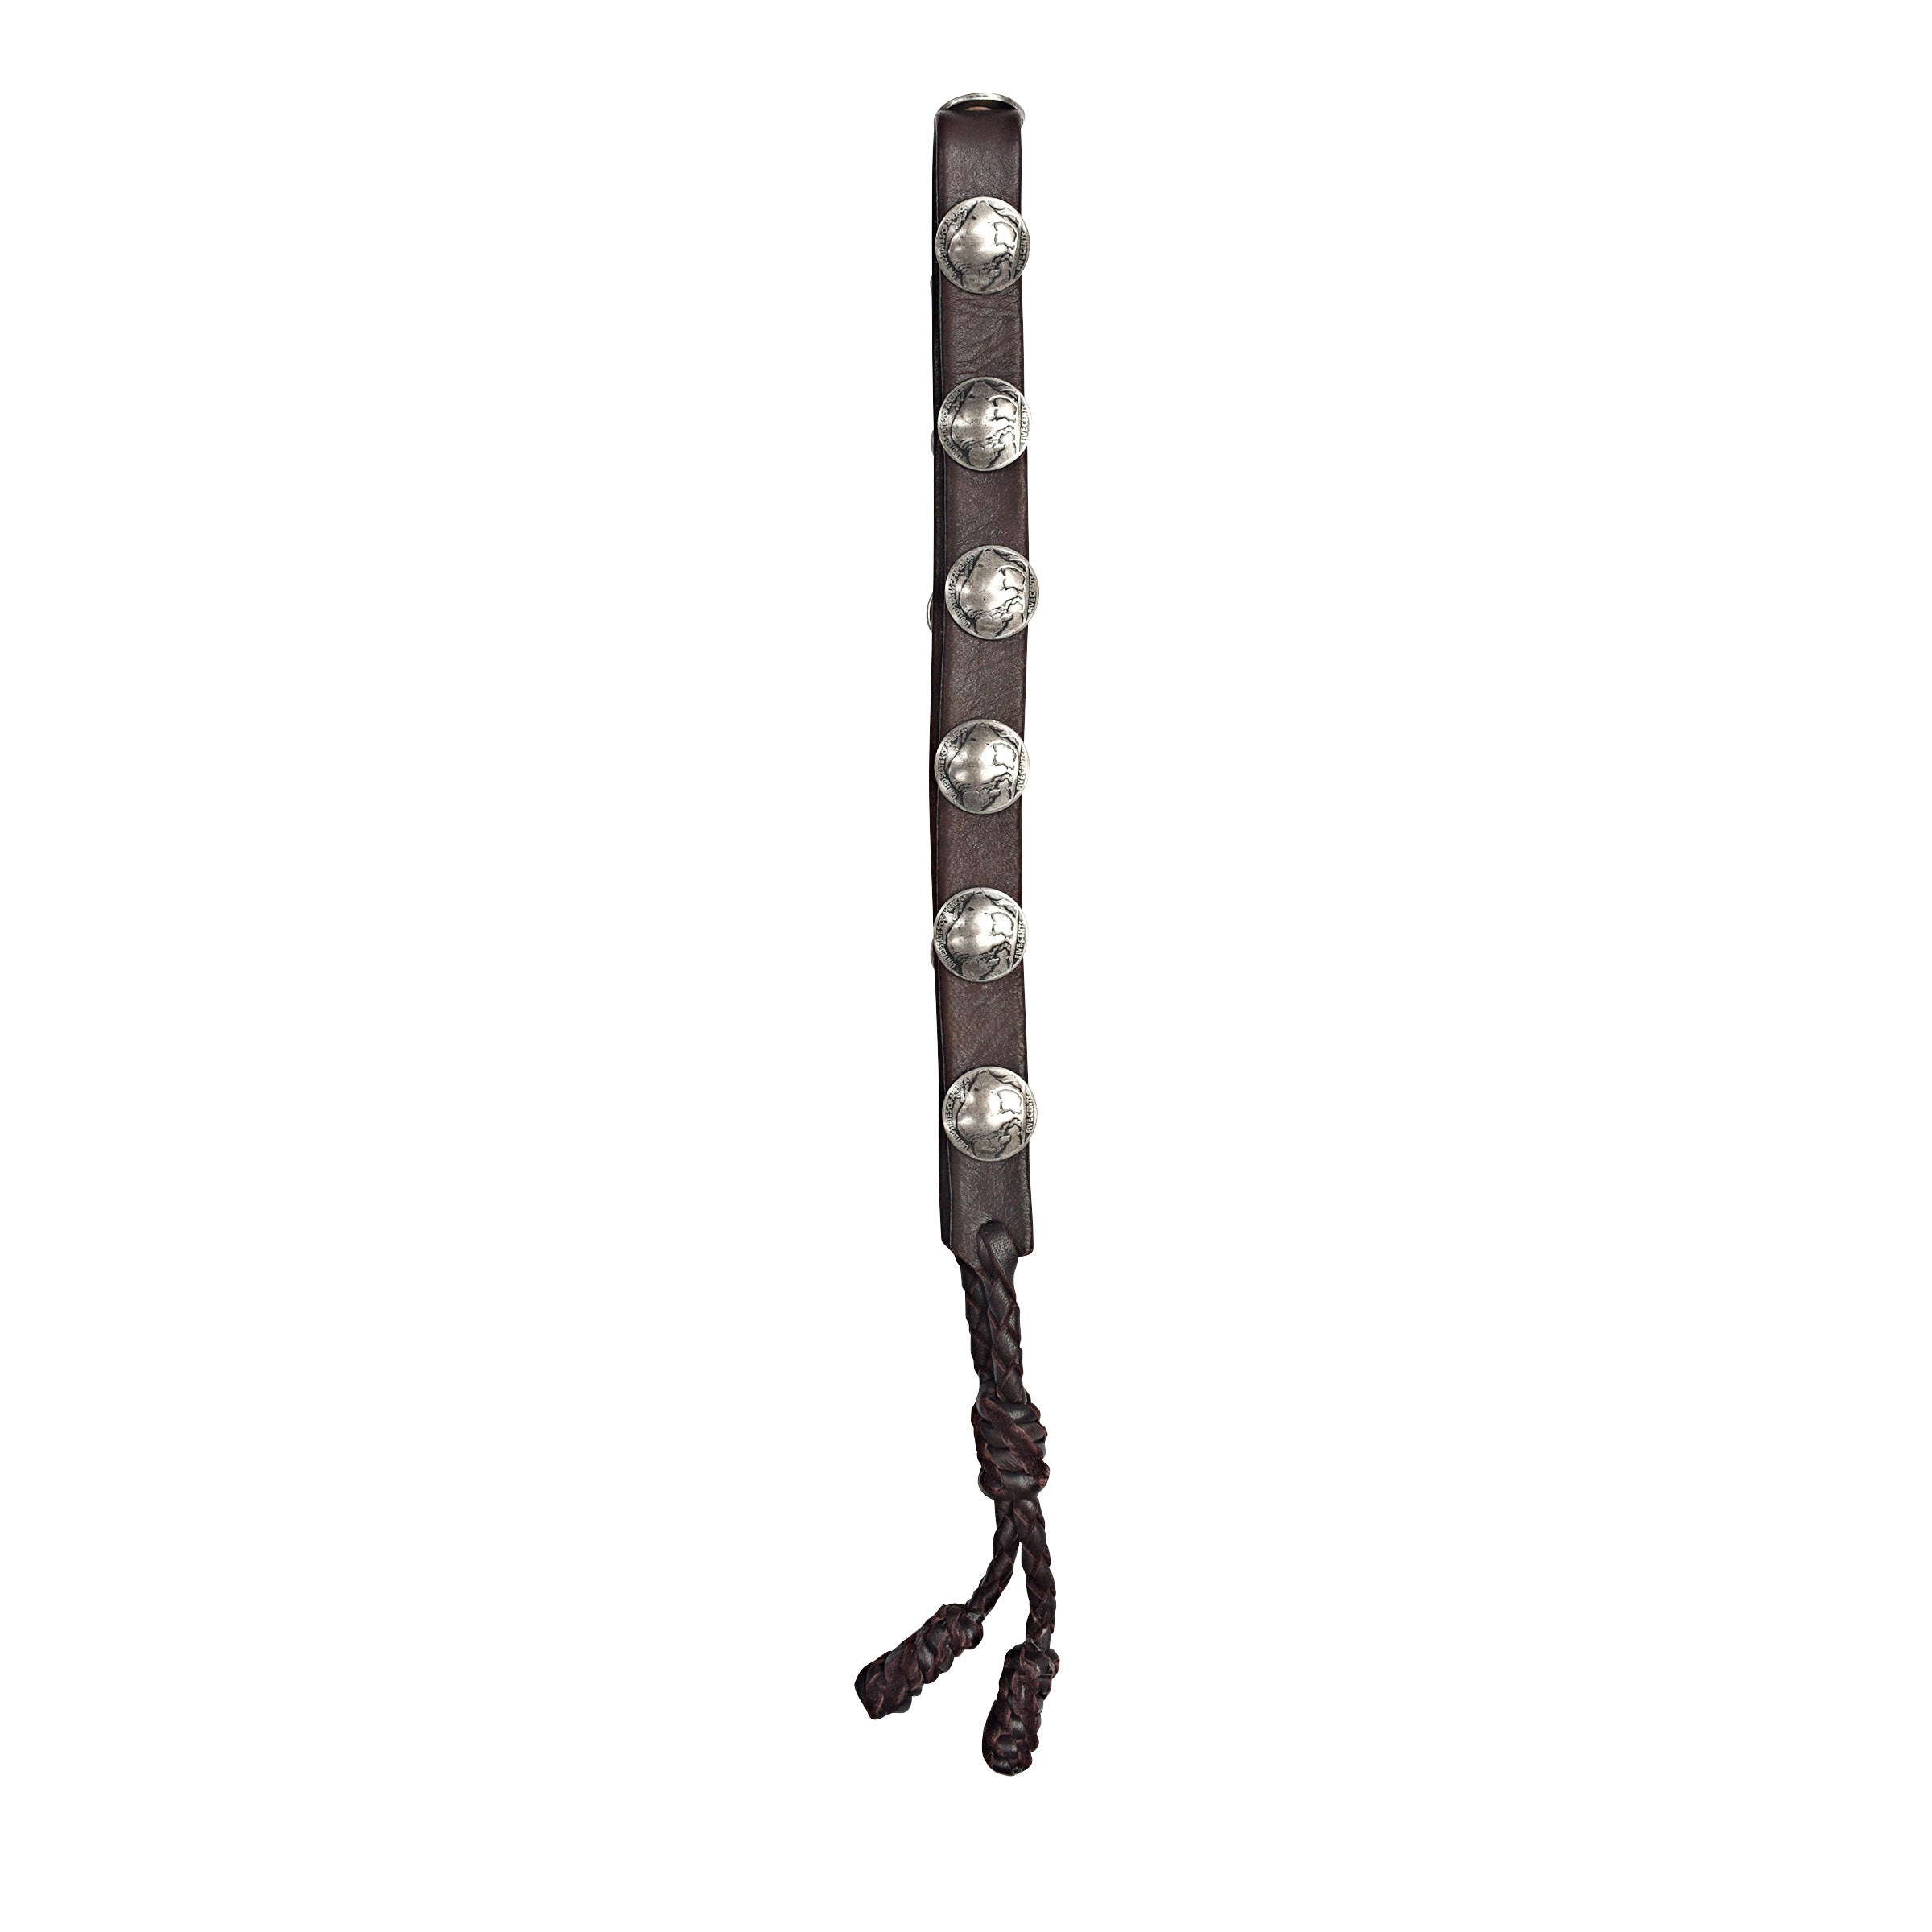 Lampman Buffalo Nickel Hatband with Braided Leather Ends - Brown